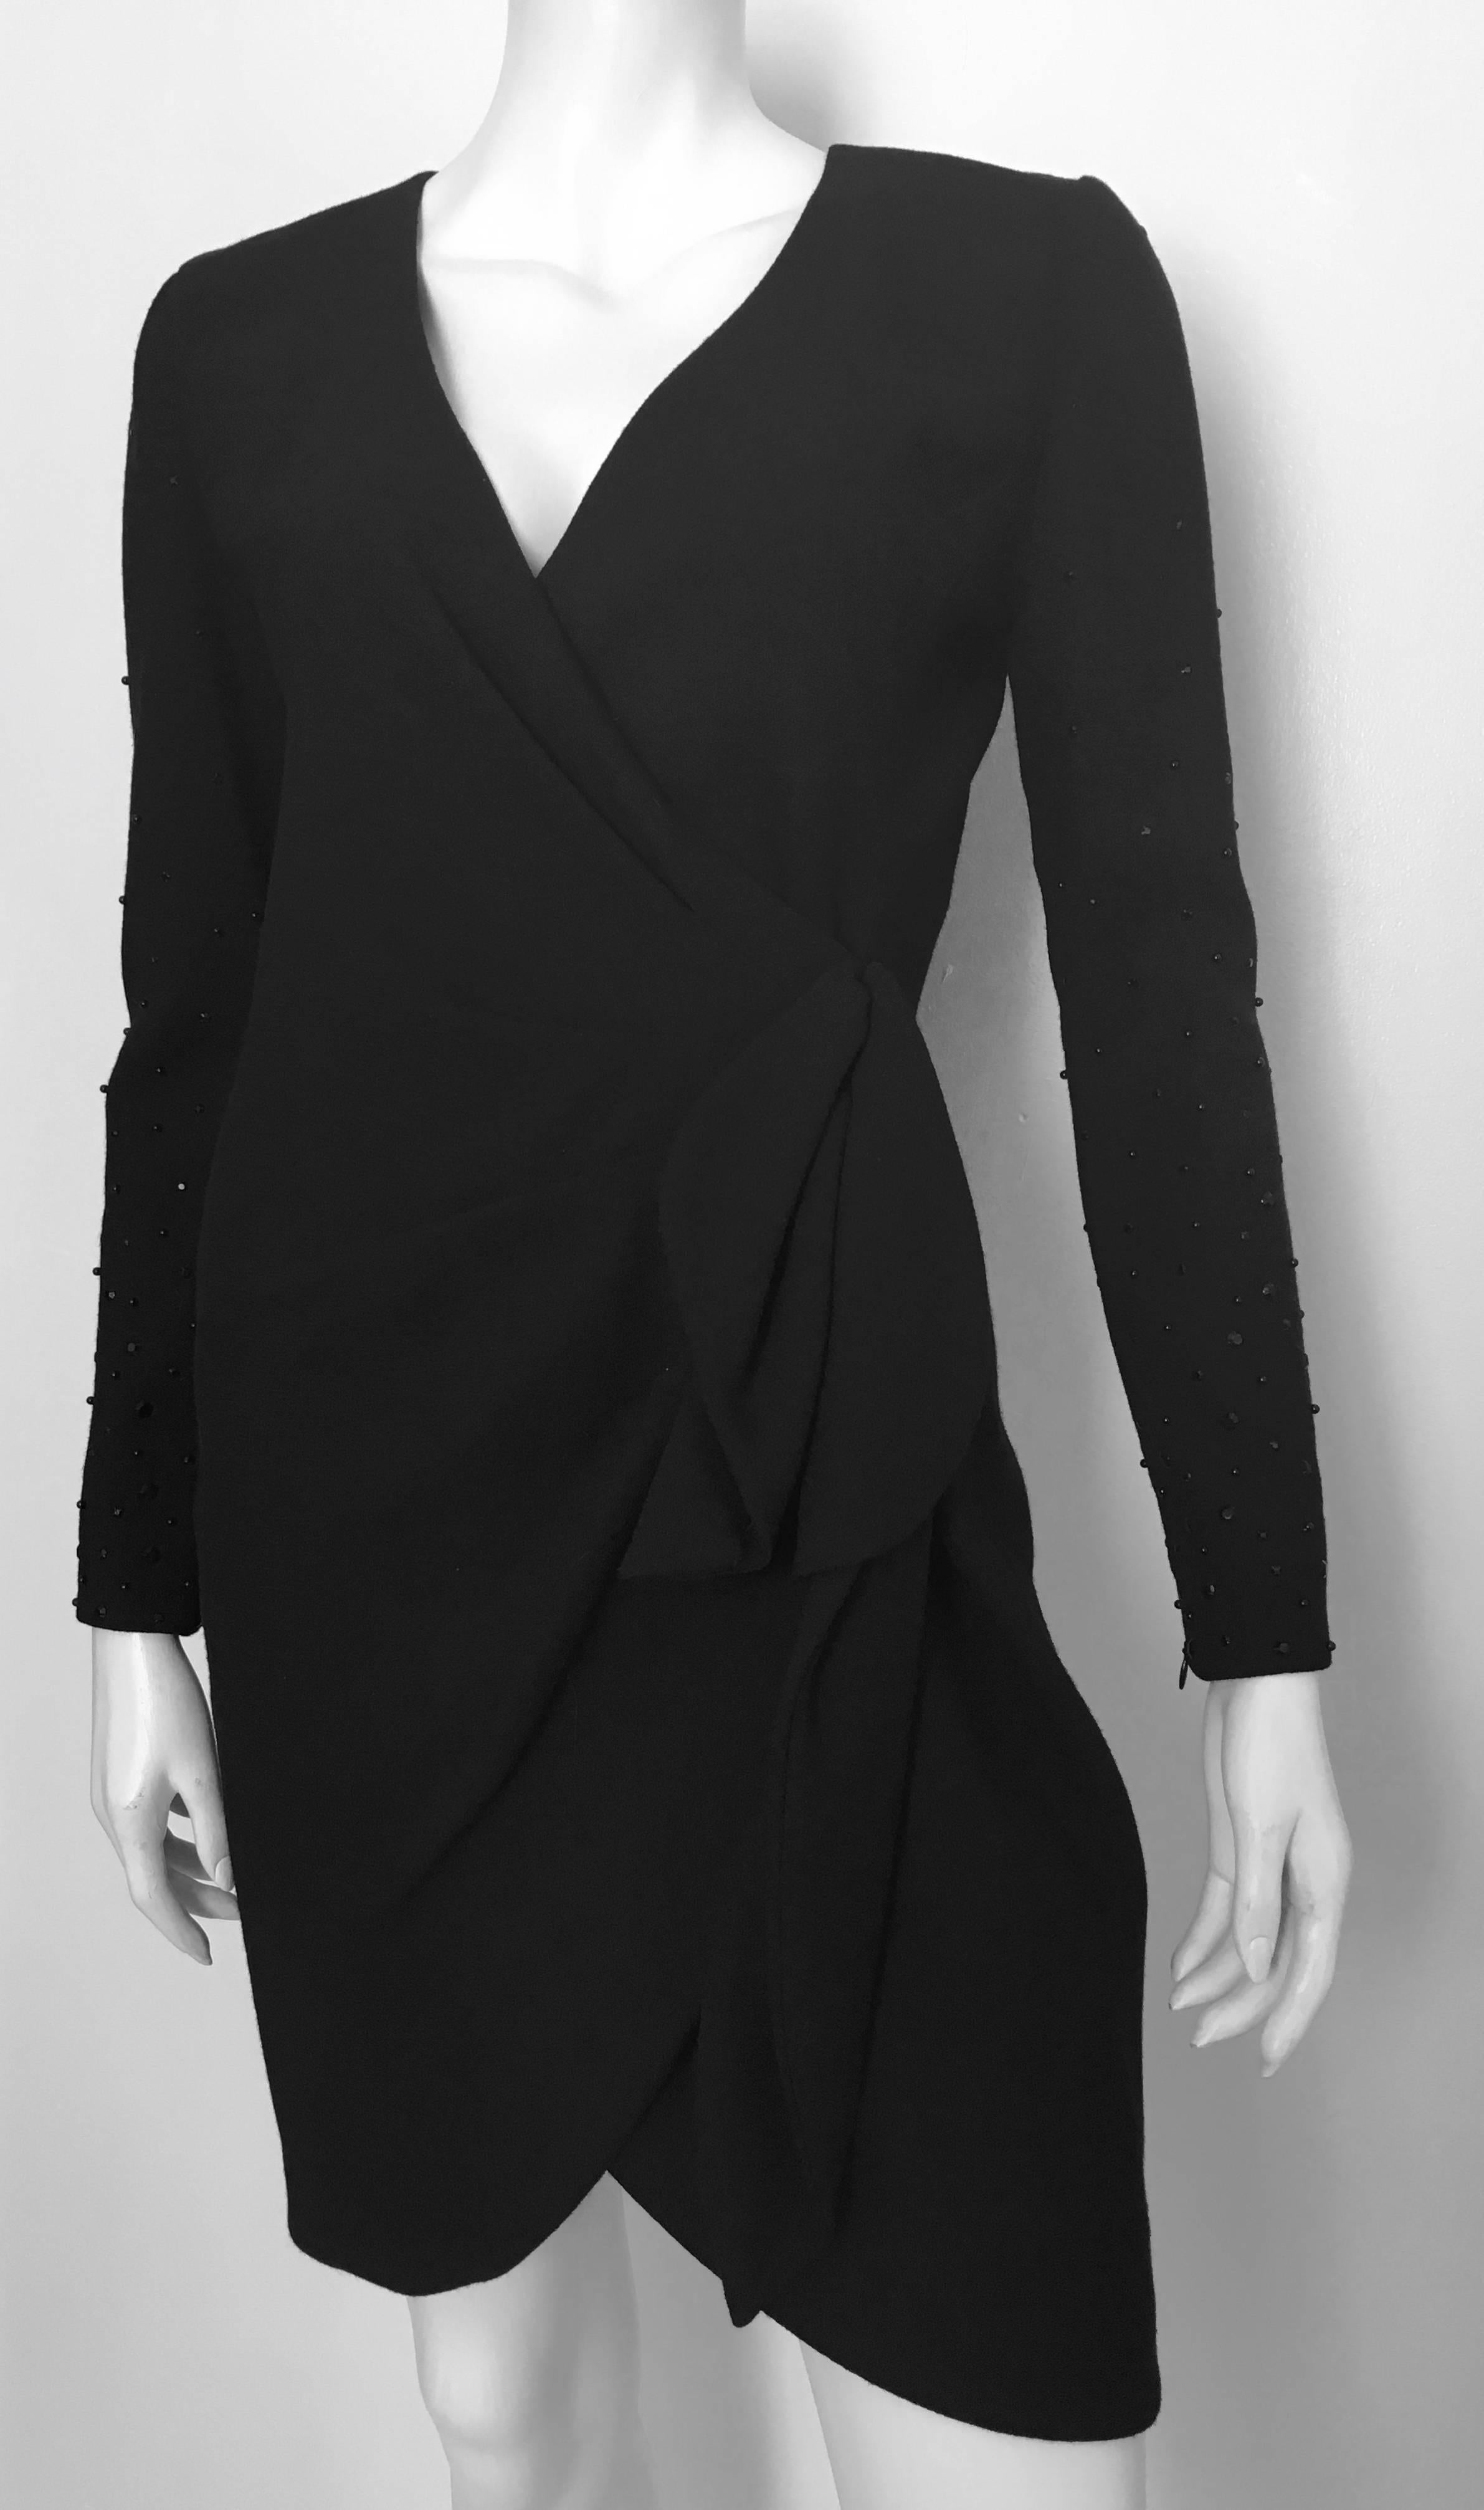 Carolina Herrera for Neiman Marcus 1990 black wool faux wrap cocktail dress with beaded zipper sleeves is a size 6.  Ladies please use your measuring tape so you can properly measure that lovely body of yours to make certain this will fit to